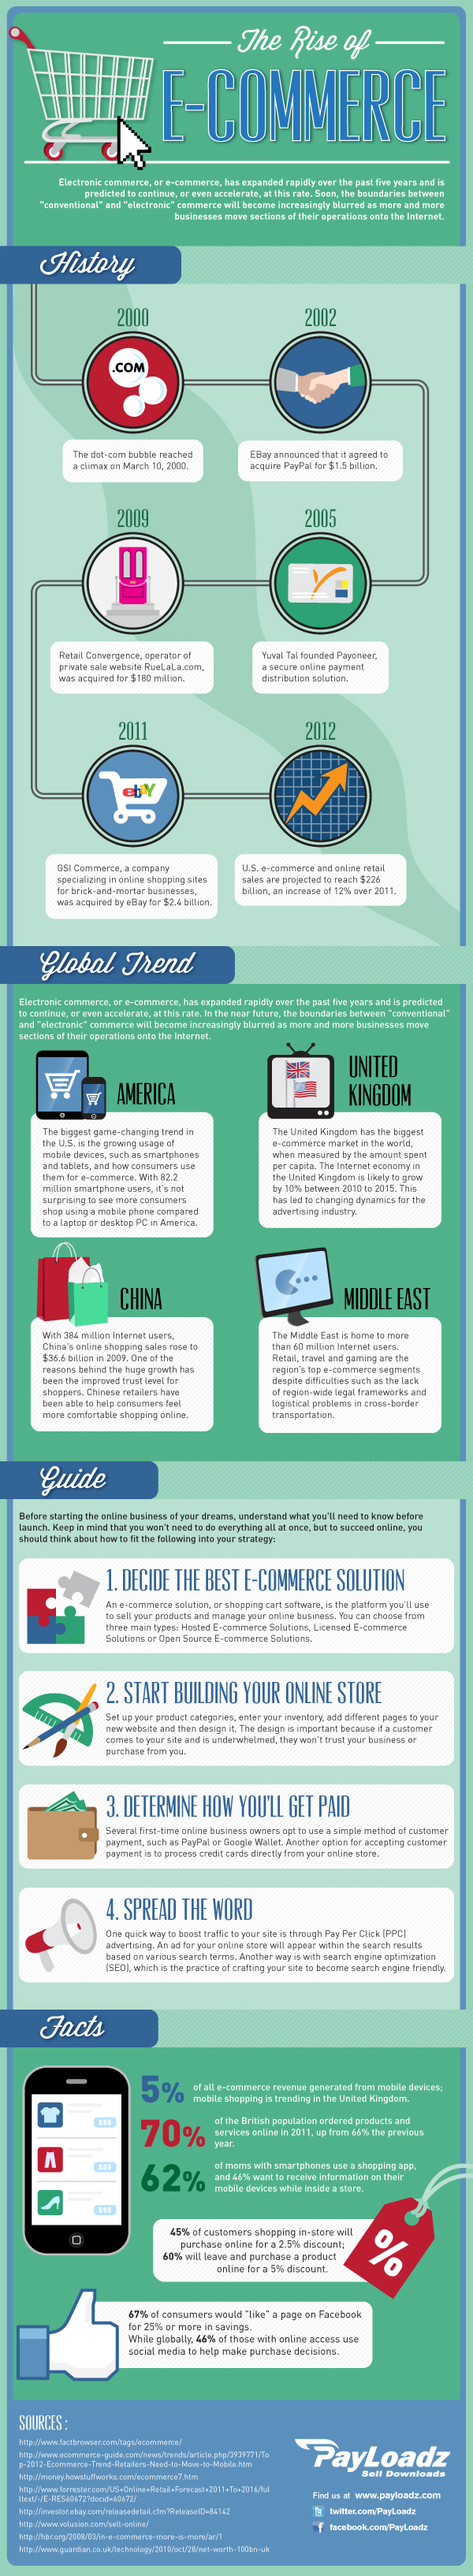 The Rise of eCommerce Infographic